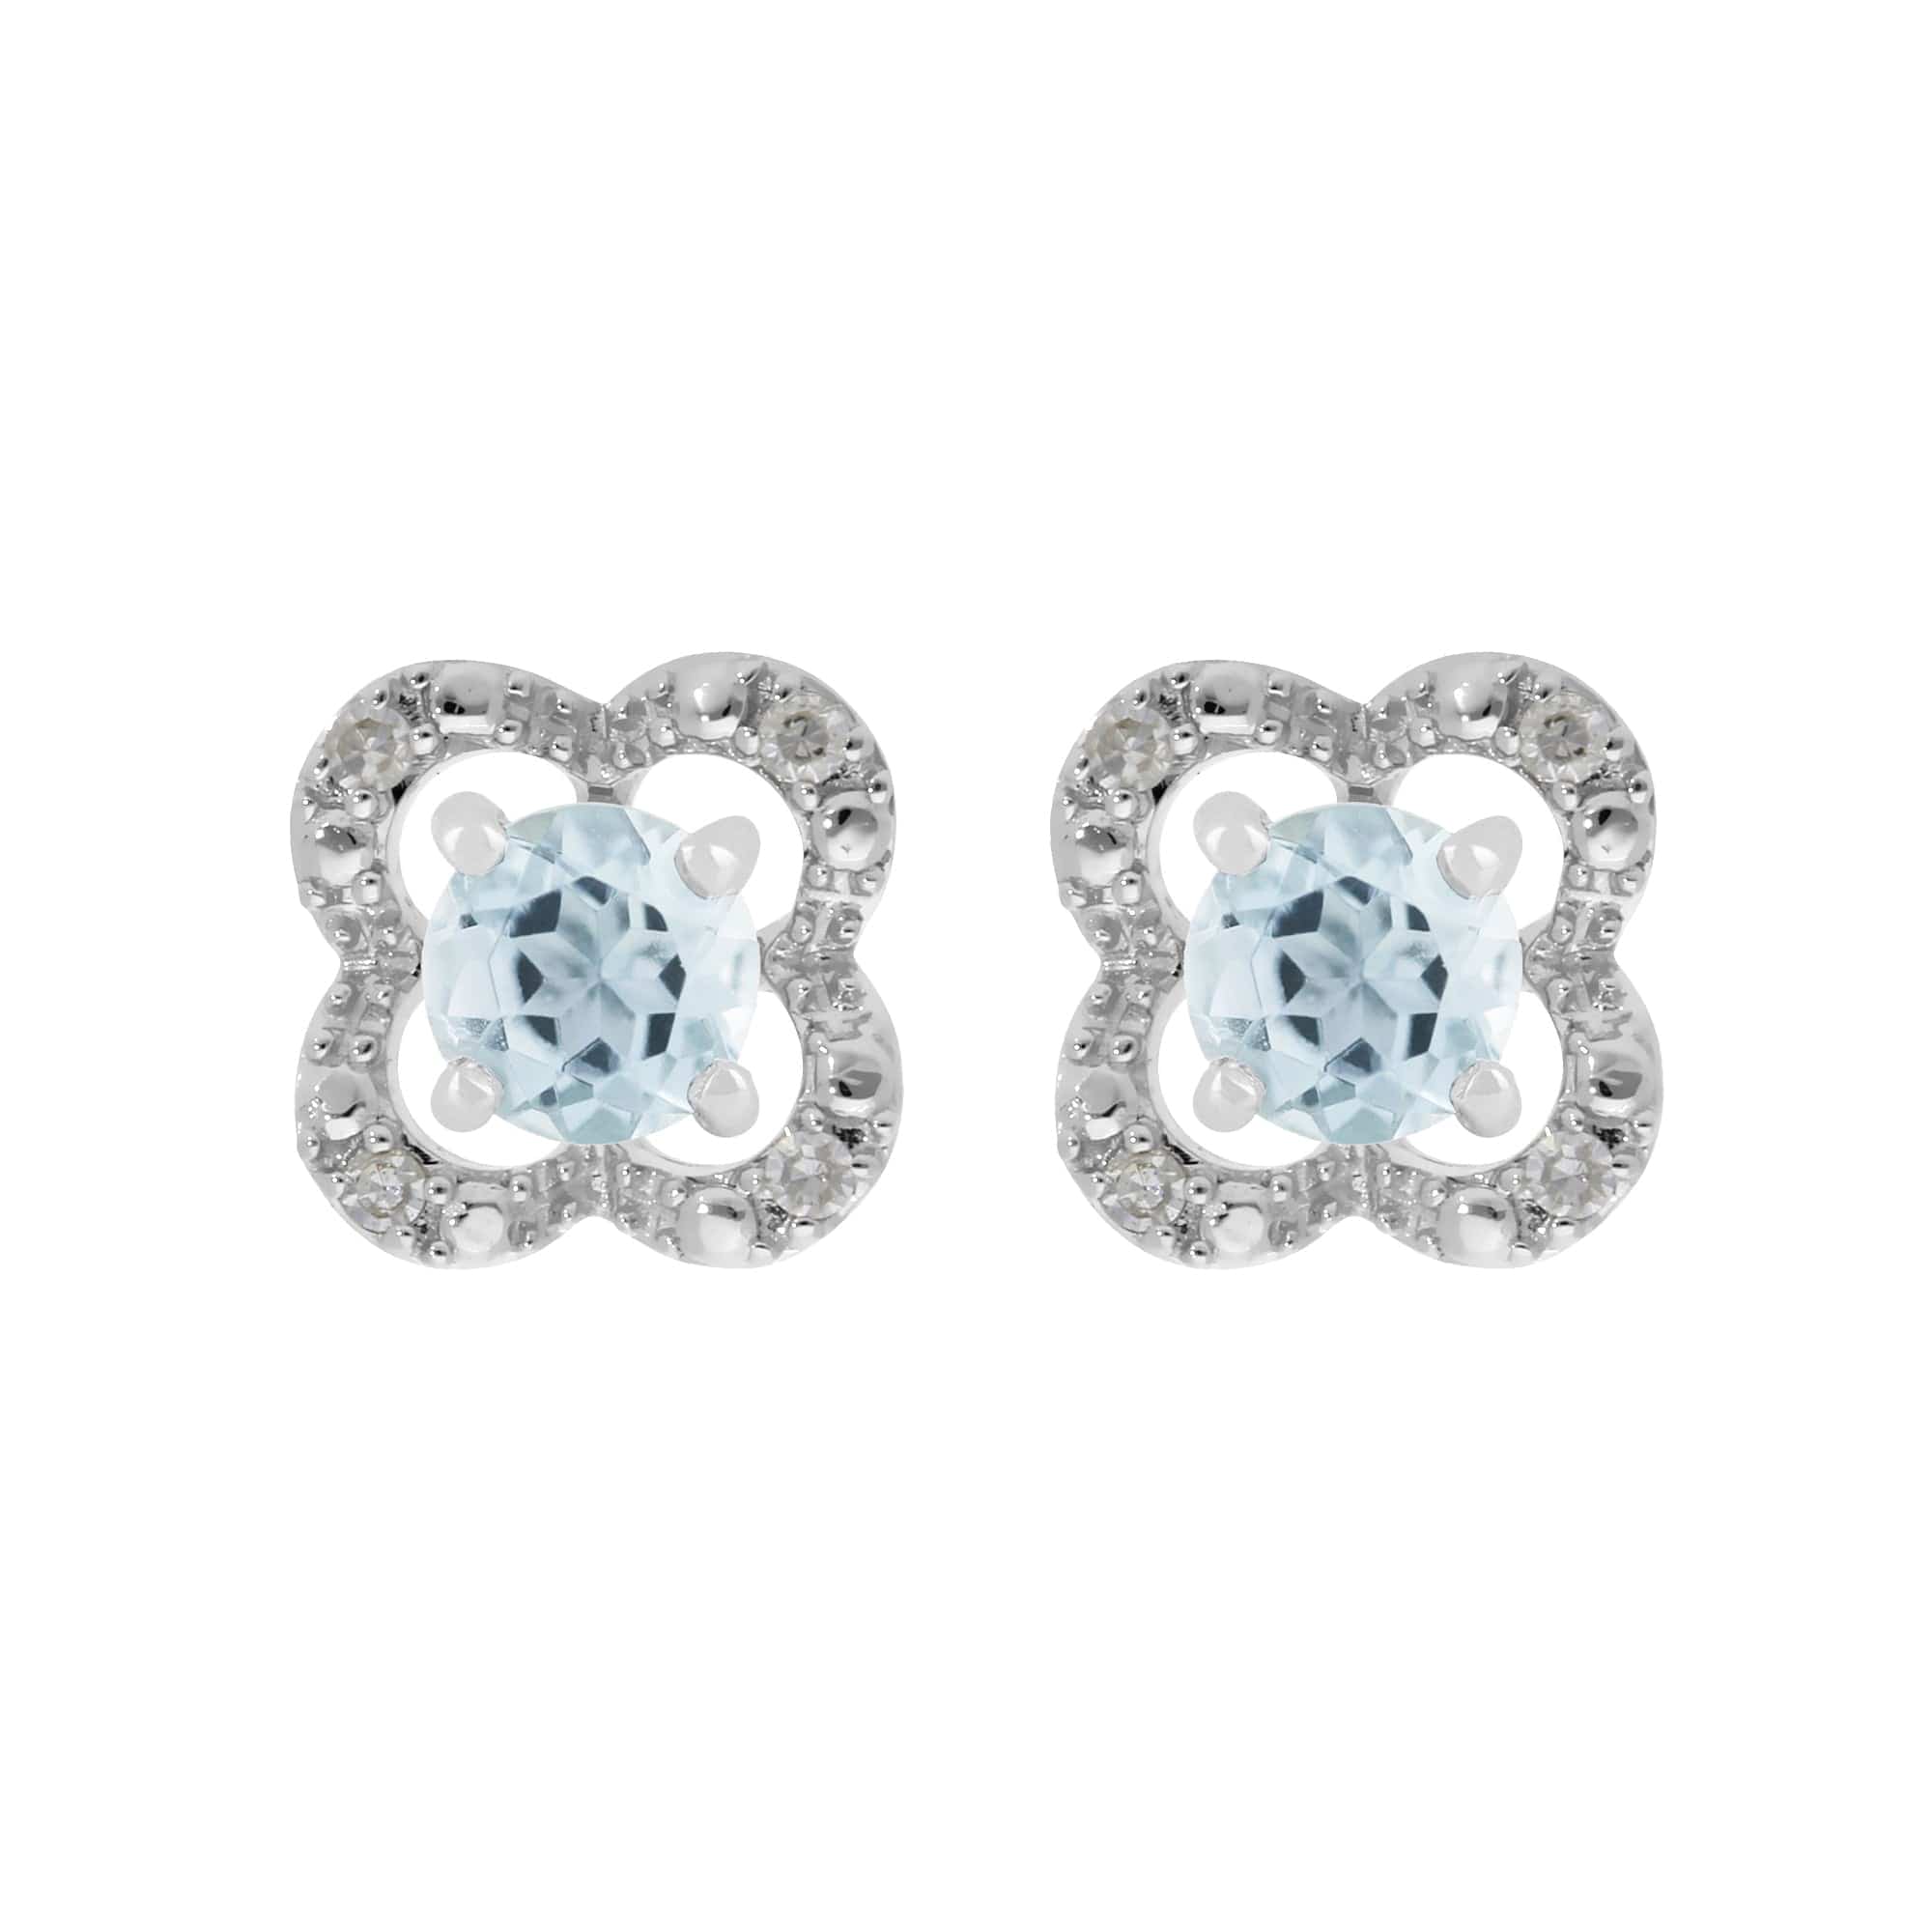 22526-162E0244019 Classic Round Aquamarine Stud Earrings with Detachable Diamond Flower Ear Jacket in 9ct White Gold 1